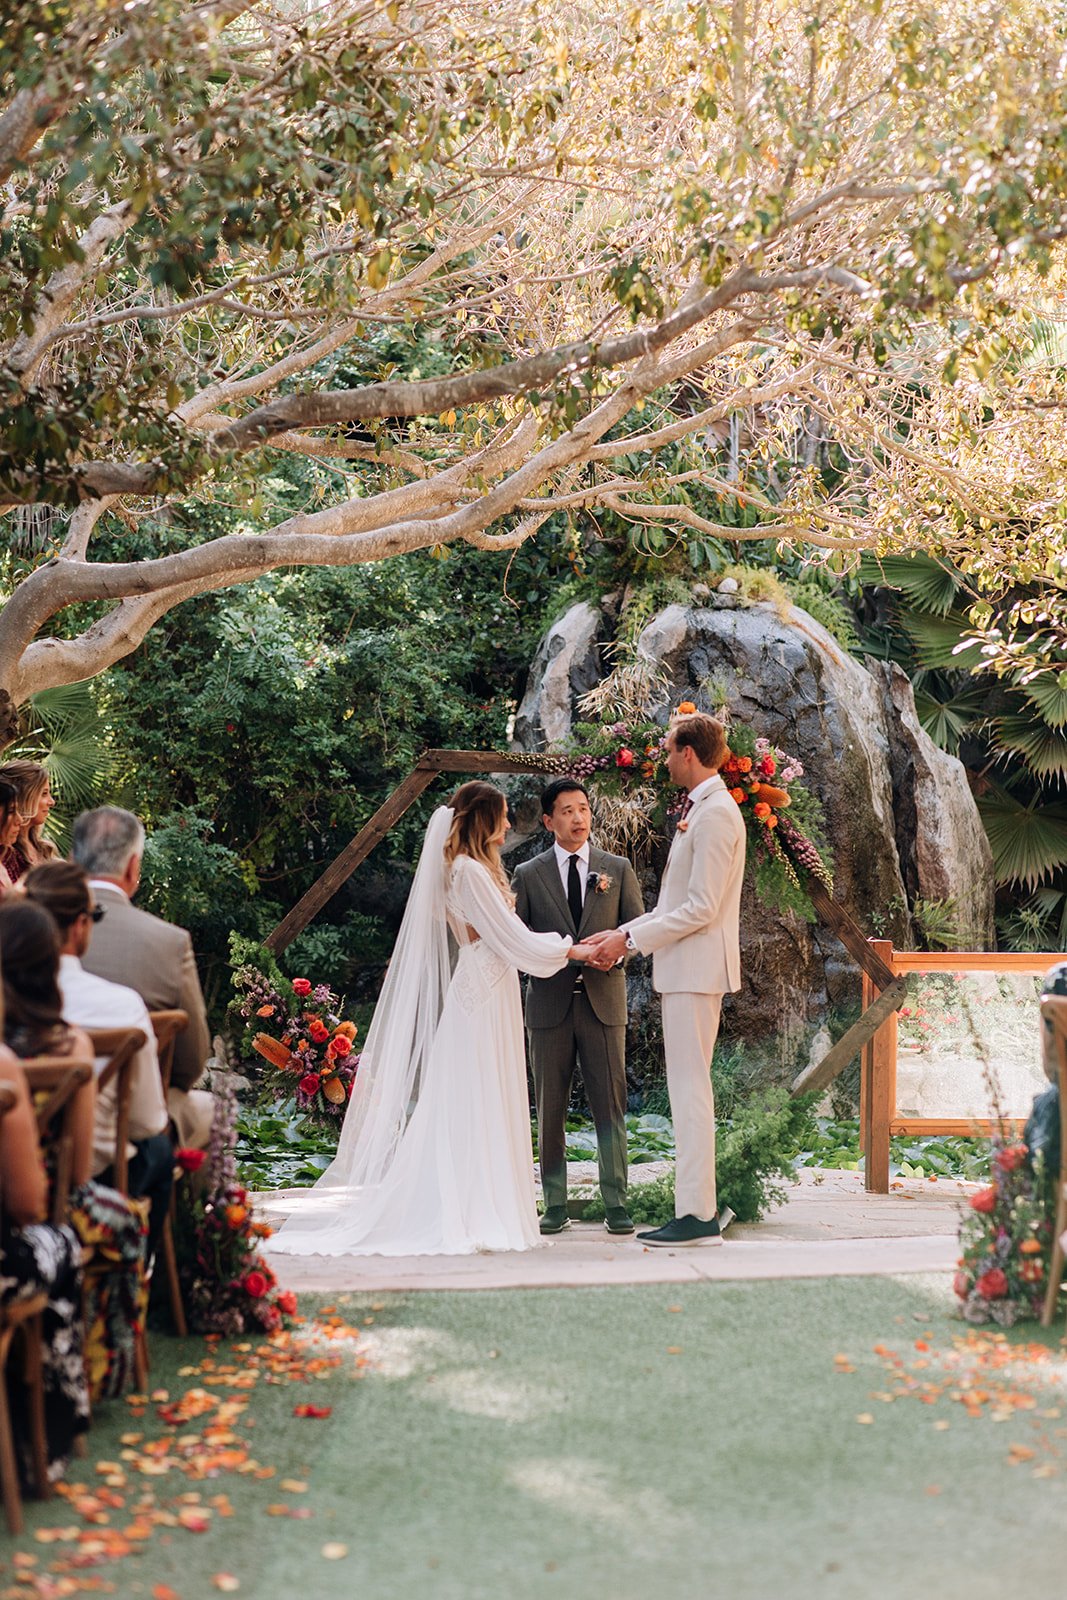 The Grooms Suite: The Cabana - Perched over a seasonal running pond, amongst the giant fig trees. This hideaway features indoor-outdoor space, overlooking your private putting green.